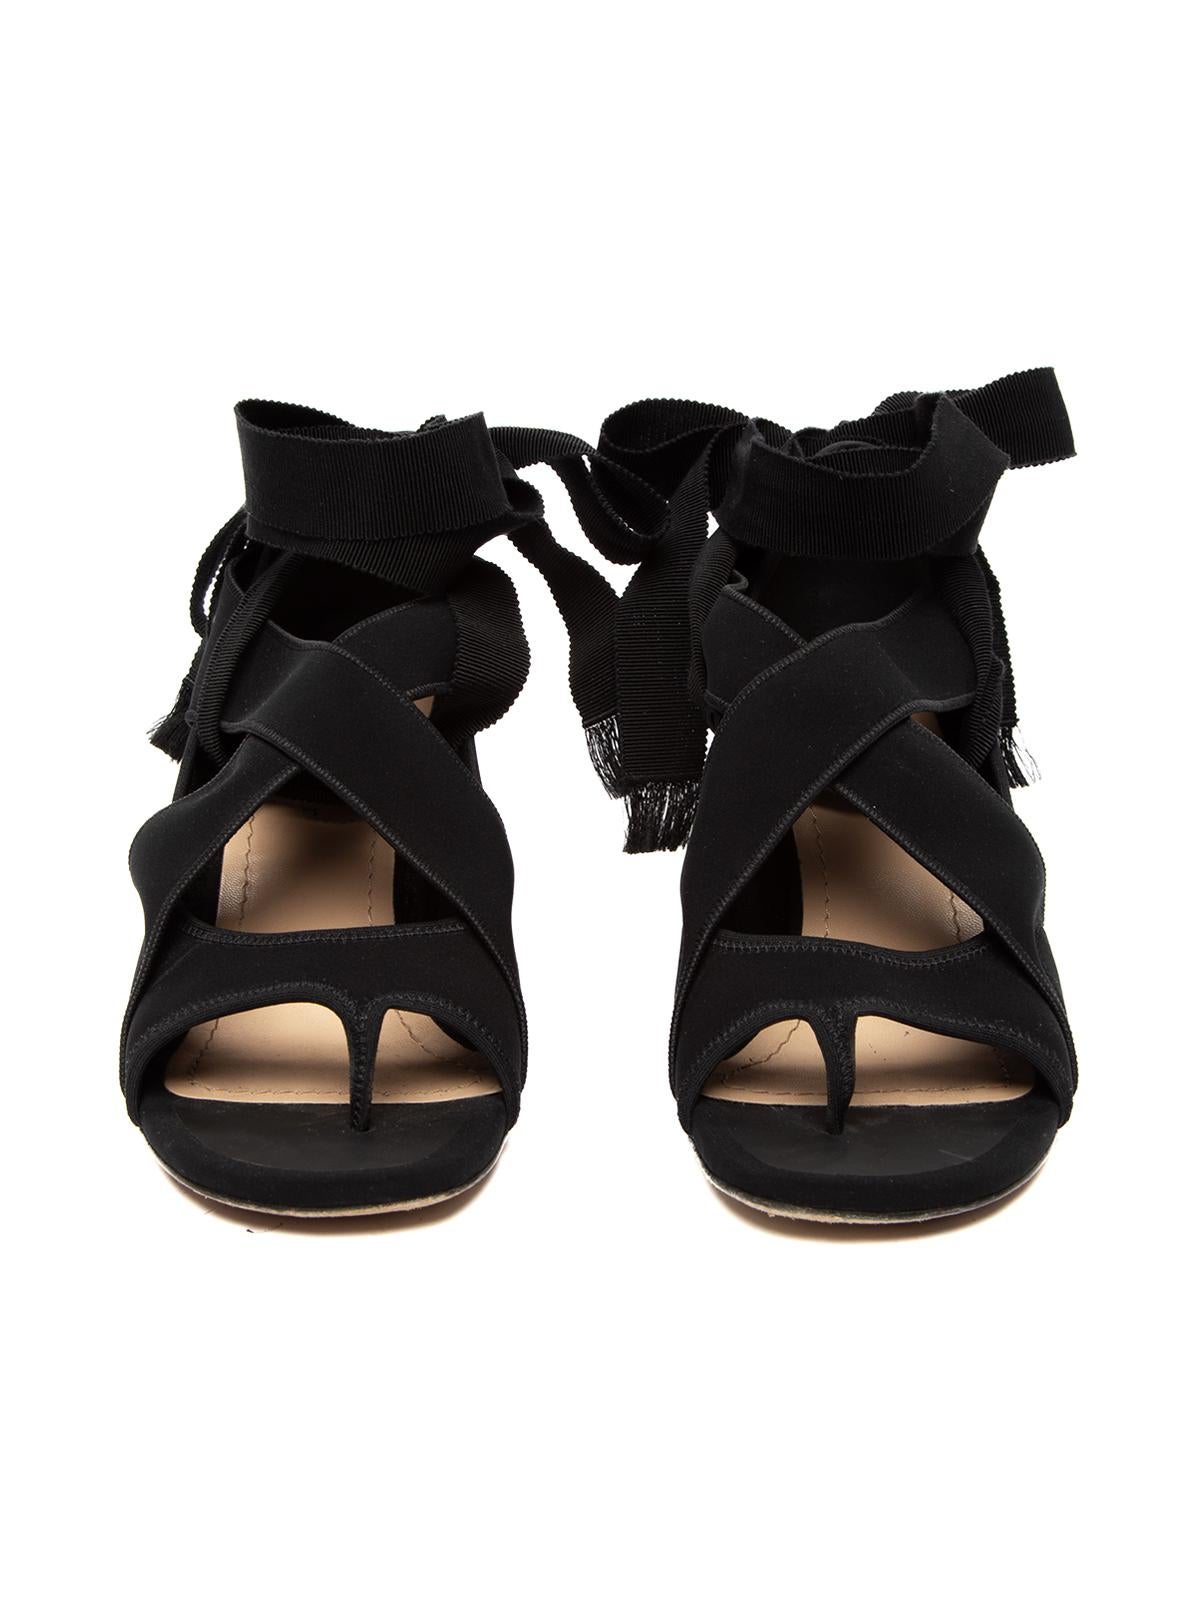 christian dior lace up sandals